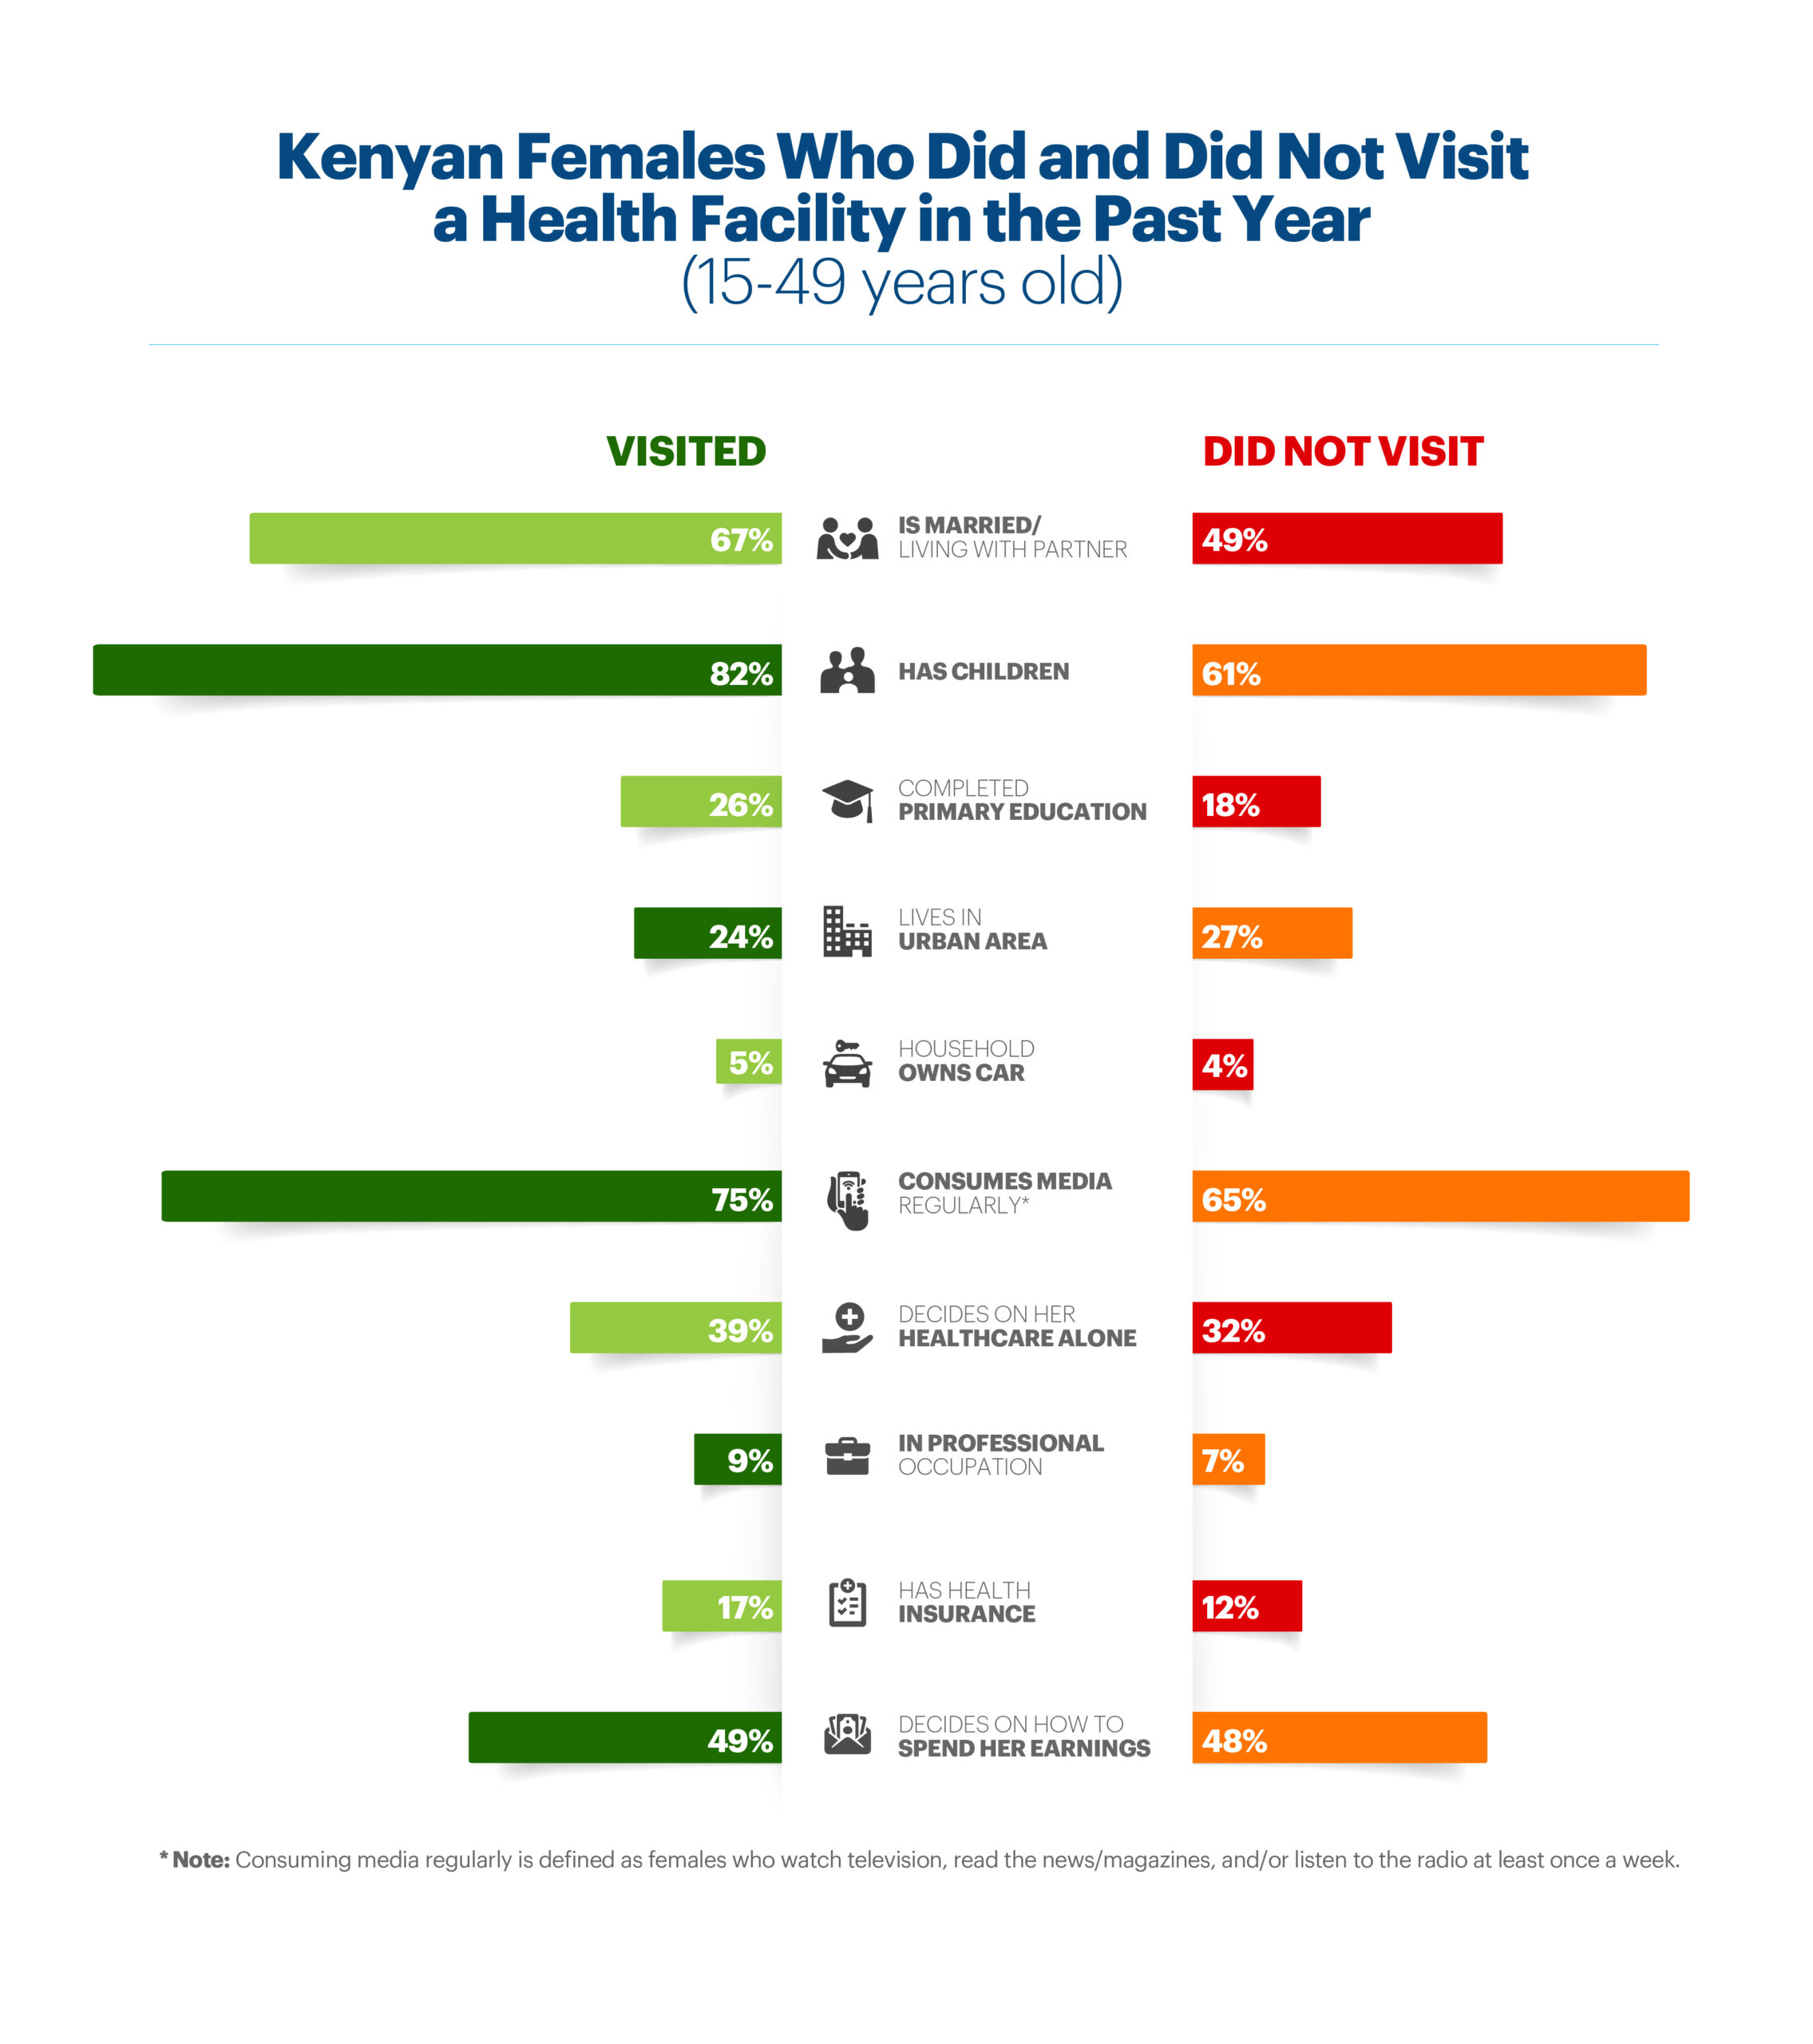 Graph of Kenyan Females Who Did and Did Not Visit a Health Facility in the Past Year